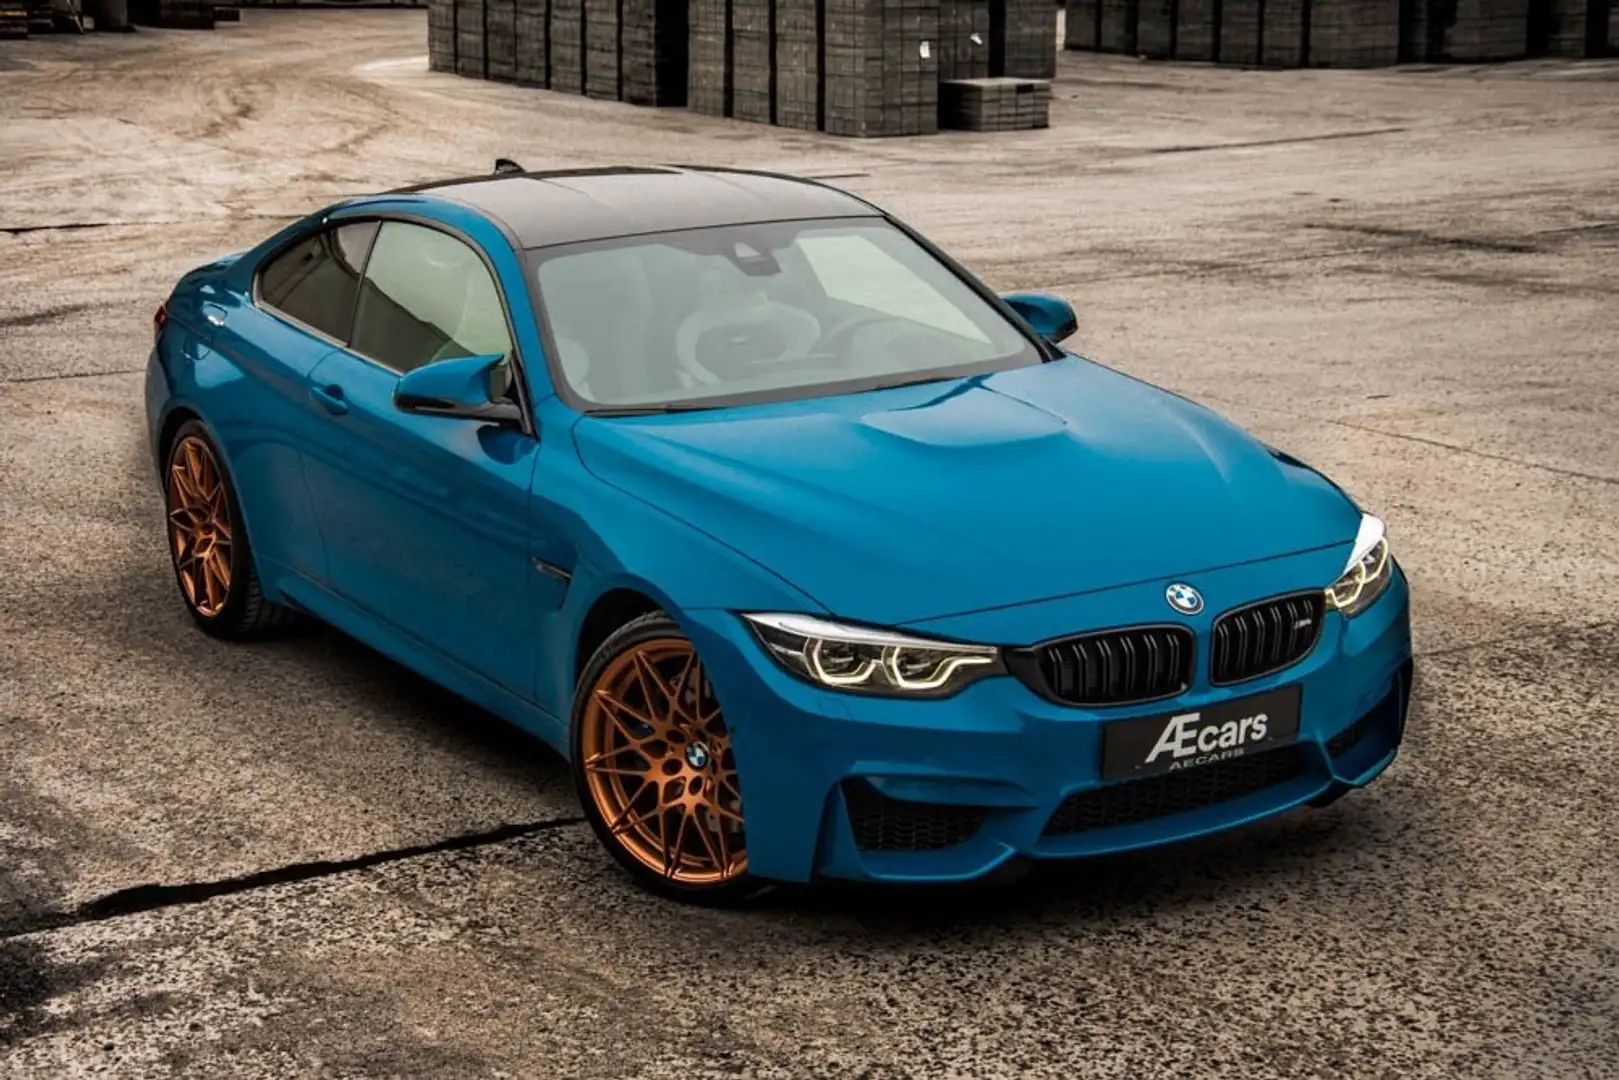 BMW M4 *** COMPETITION HERITAGE / LIMITED 1 OF 750 *** Blauw - 2